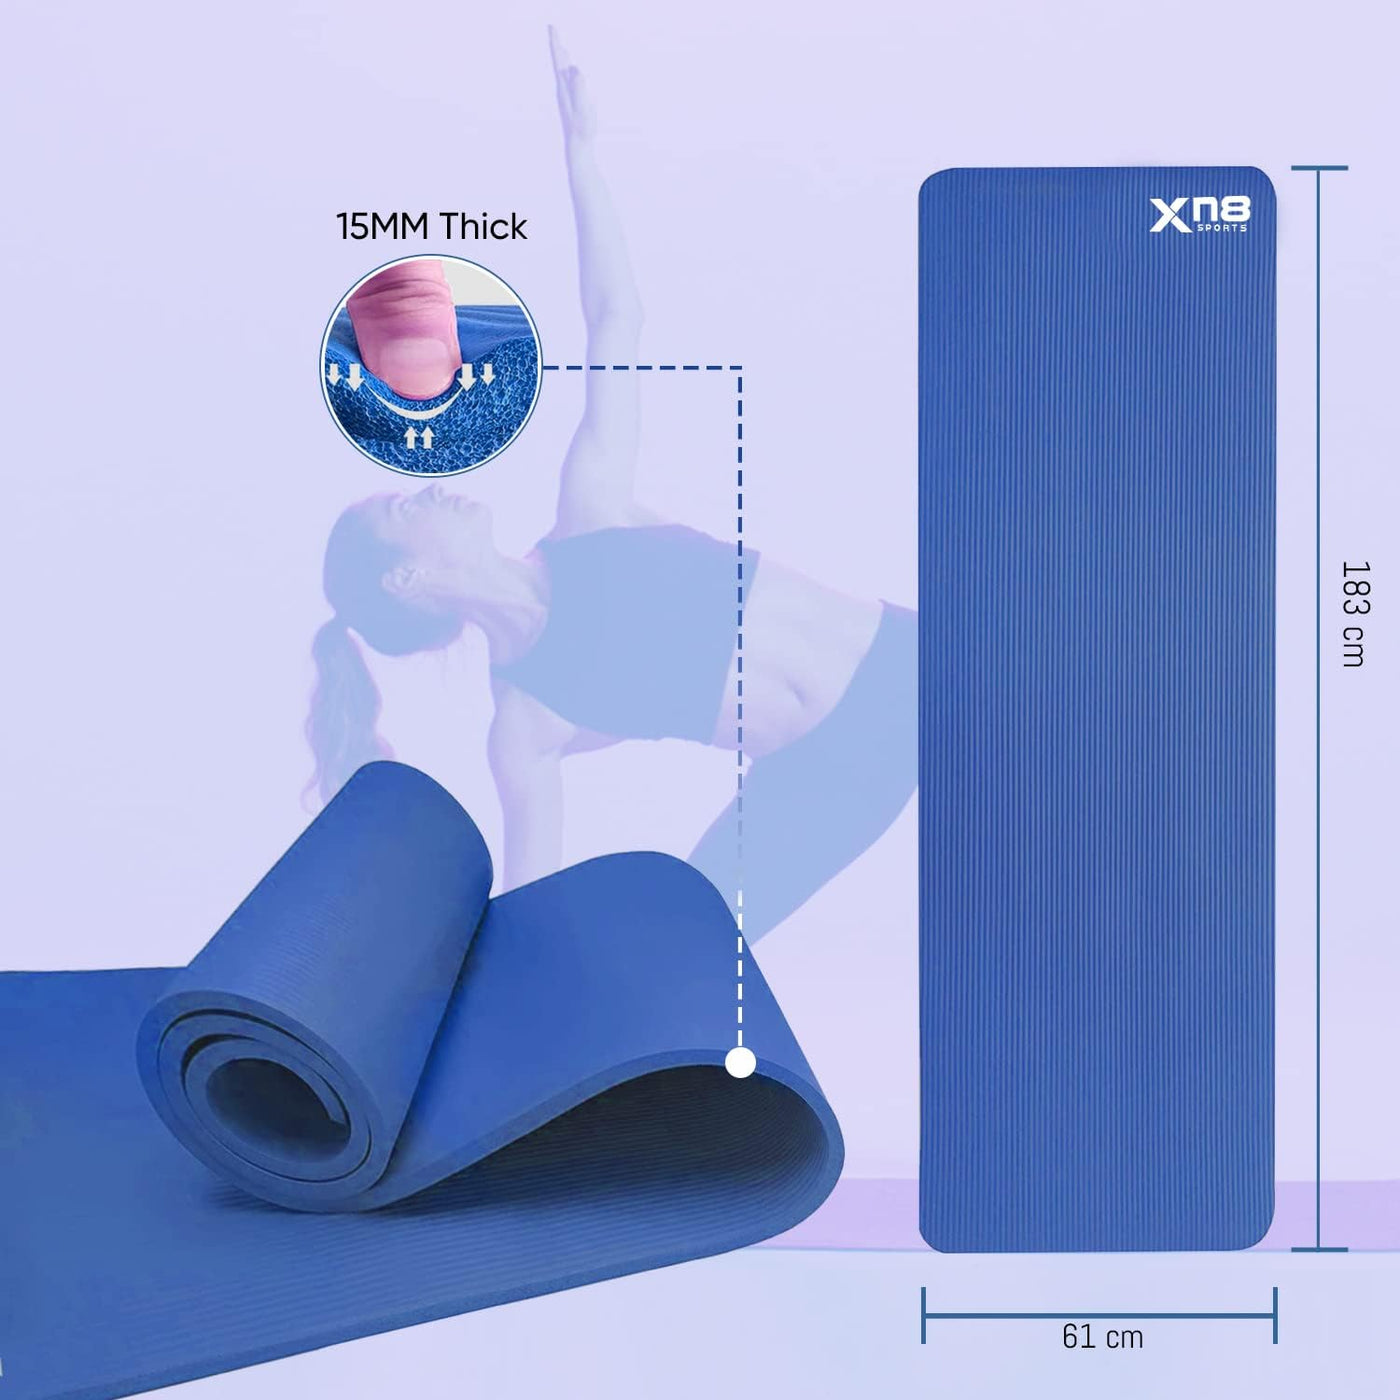  15mm Thick Yoga Mat, Non Slip Yoga Mat with Carry Strap, Eco  Friendly & SGS Certified NBR Material – Odorless, Non Slip, Durable and  Lightweight,Thickness 15mm (Color : Deep Blue) 